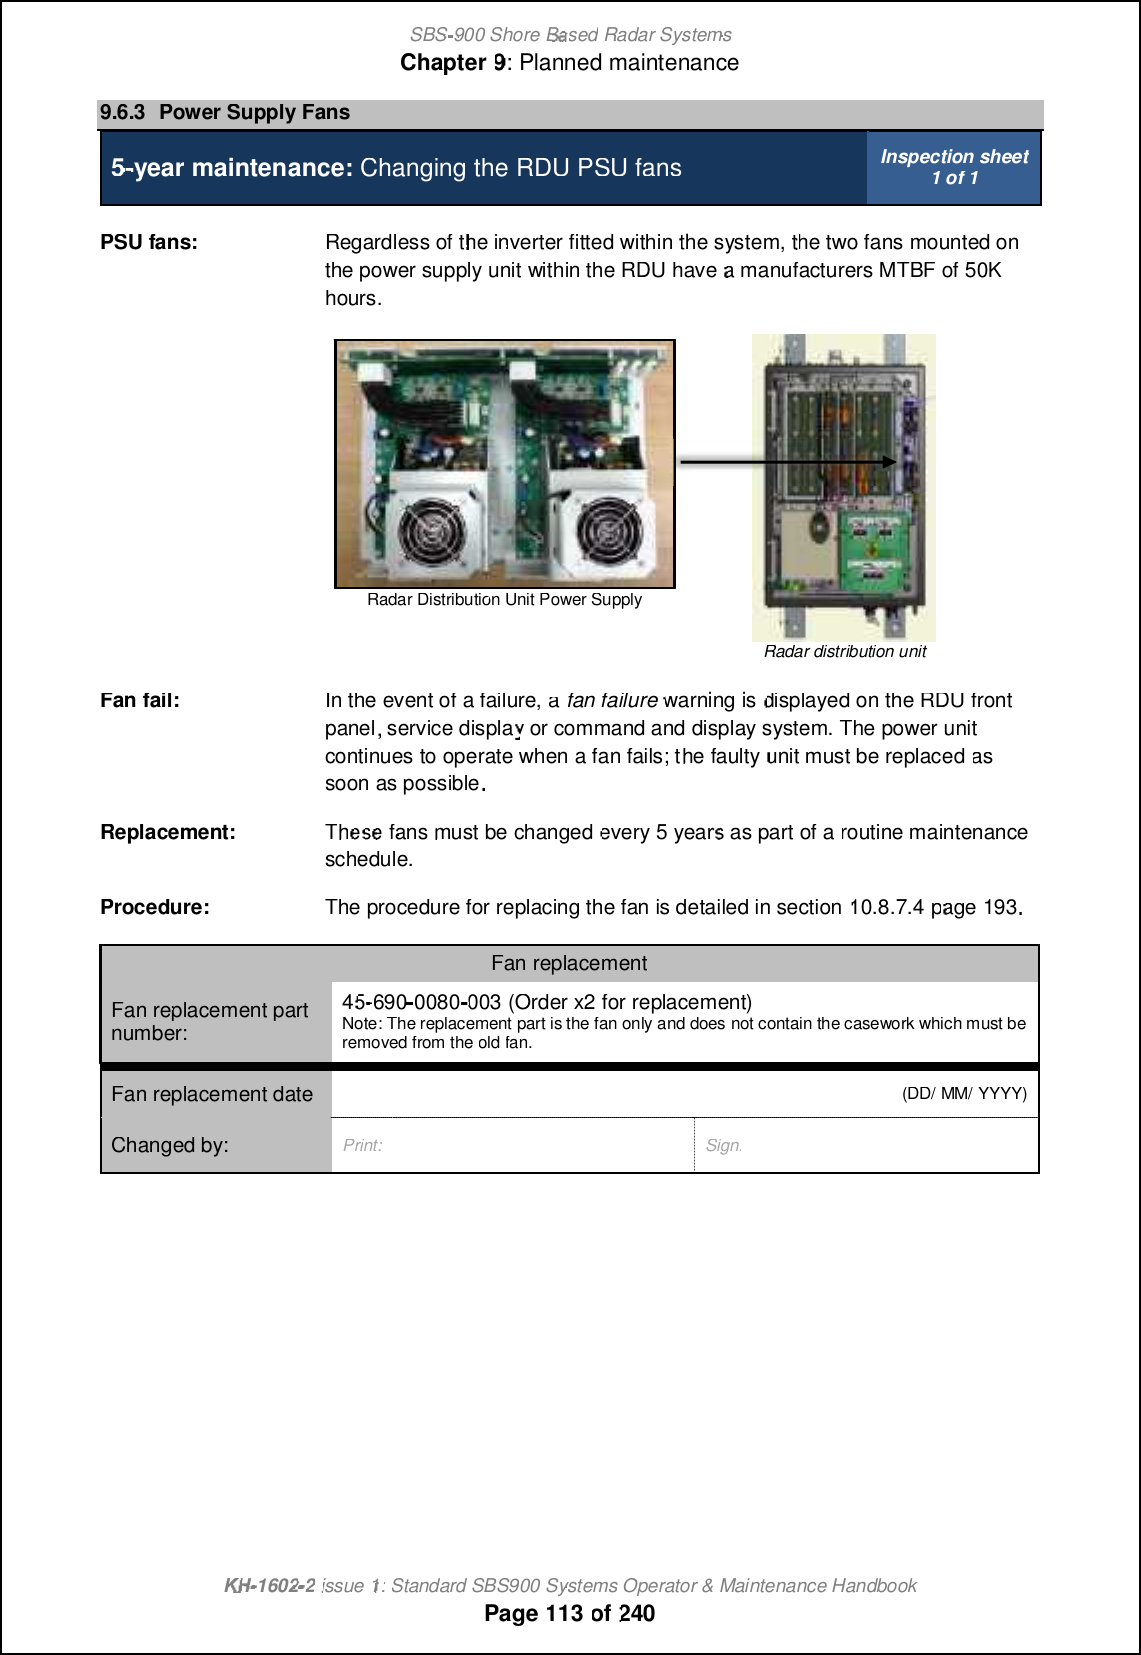 SBS-900 ShoreBaBasedRadar SystemsChapter9:Planned maintenanceKHKH-1602 2issue 1:Standard SBS900 Systems Operator &amp; Maintenance HandbookPage113of2409.6.3Power Supply Fans5-year maintenance:Changing theRDU PSU fansInspection sheet1 of 1PSU fans:Regardless of the inverter fitted withinthe system, the two fans mounted onthepower supplyunitwithin the RDUhaveamanufacturers MTBF of 50Khours.Radar Distribution Unit Power SupplyRadar distribution unitFan fail:In the event of a failure,afan failurewarning isdisplayed onthe RDUfrontpanel, service display or command and display system. The power unitcontinues to operate when a fan fails; the faultyunit must bereplacedassoon as possible.Replacement:Thehesesefansmust bechangedevery5 years as part of aroutine maintenanceschedule.Procedure:The procedure for replacing the fan is detailed in section10.8.7.4page193.Fan replacementFan replacement partnumber:4545-690-0080003(Order x2 for replacement)Note: The replacement part is the fan only and does not contain the casework which must beremoved from theoldfan.Fan replacement date(DD/ MM/ YYYY)Changed by:Print:Sign: